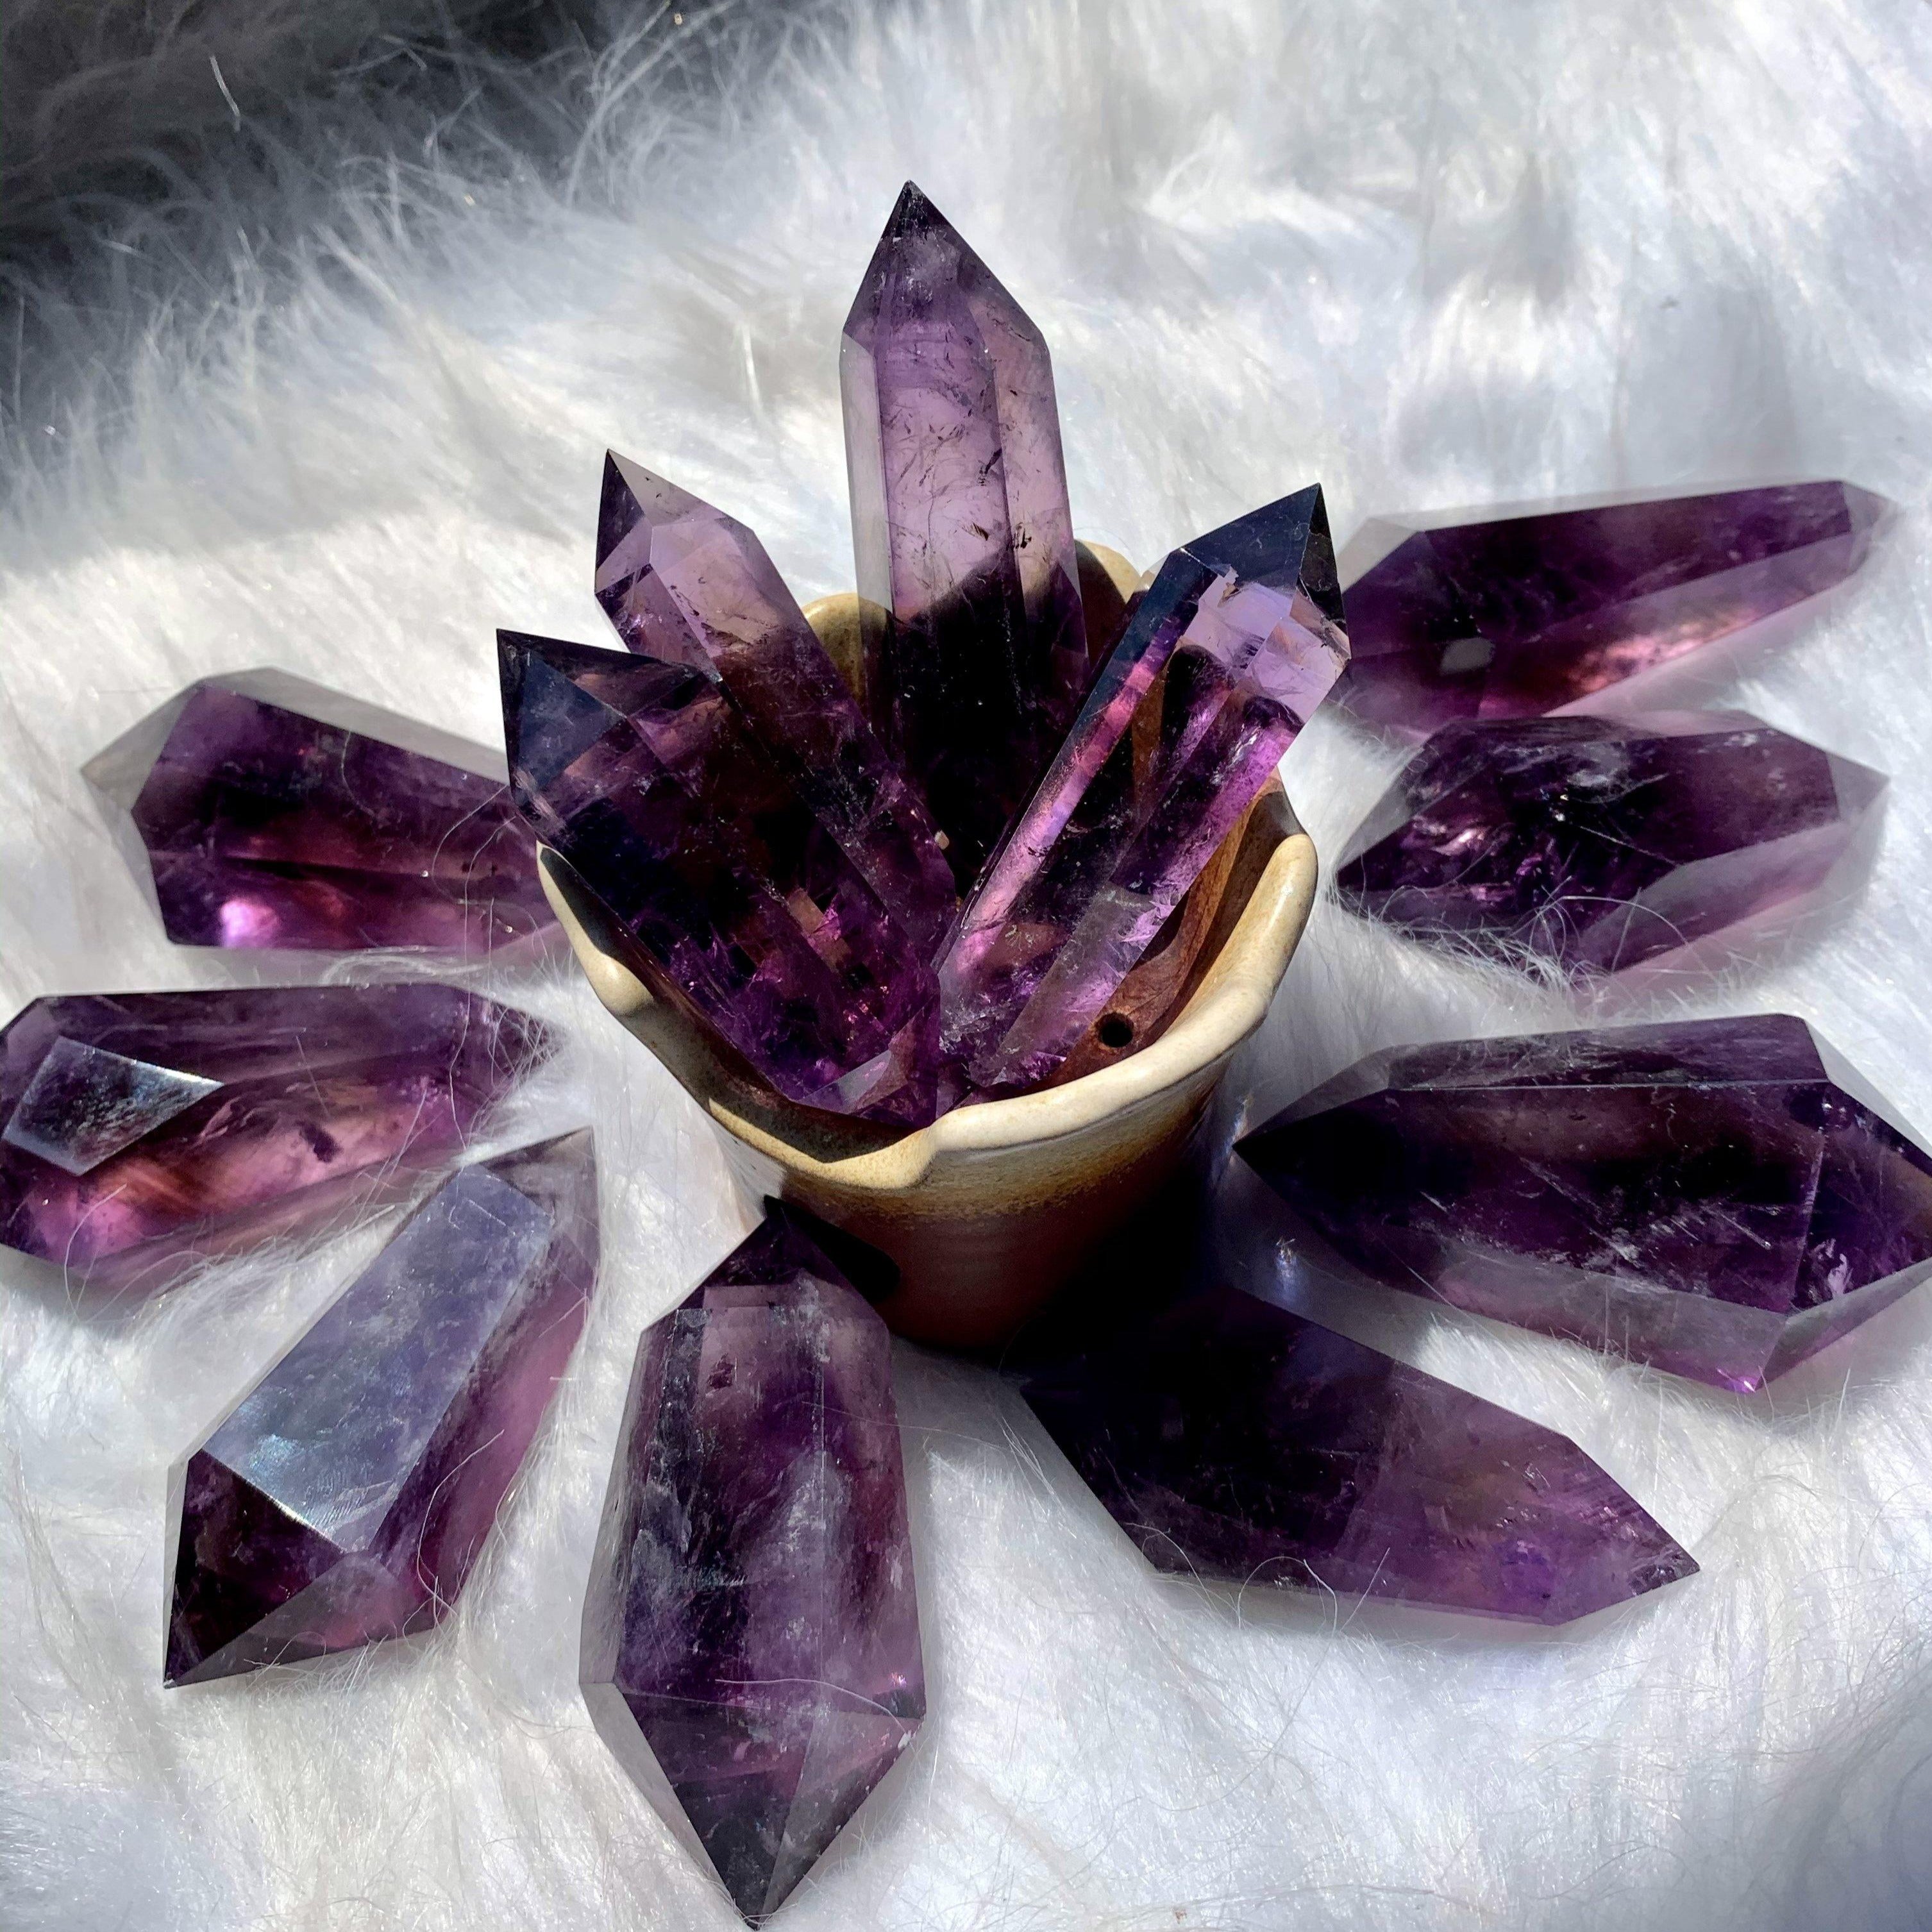 Reikistal Amethyst Double Point